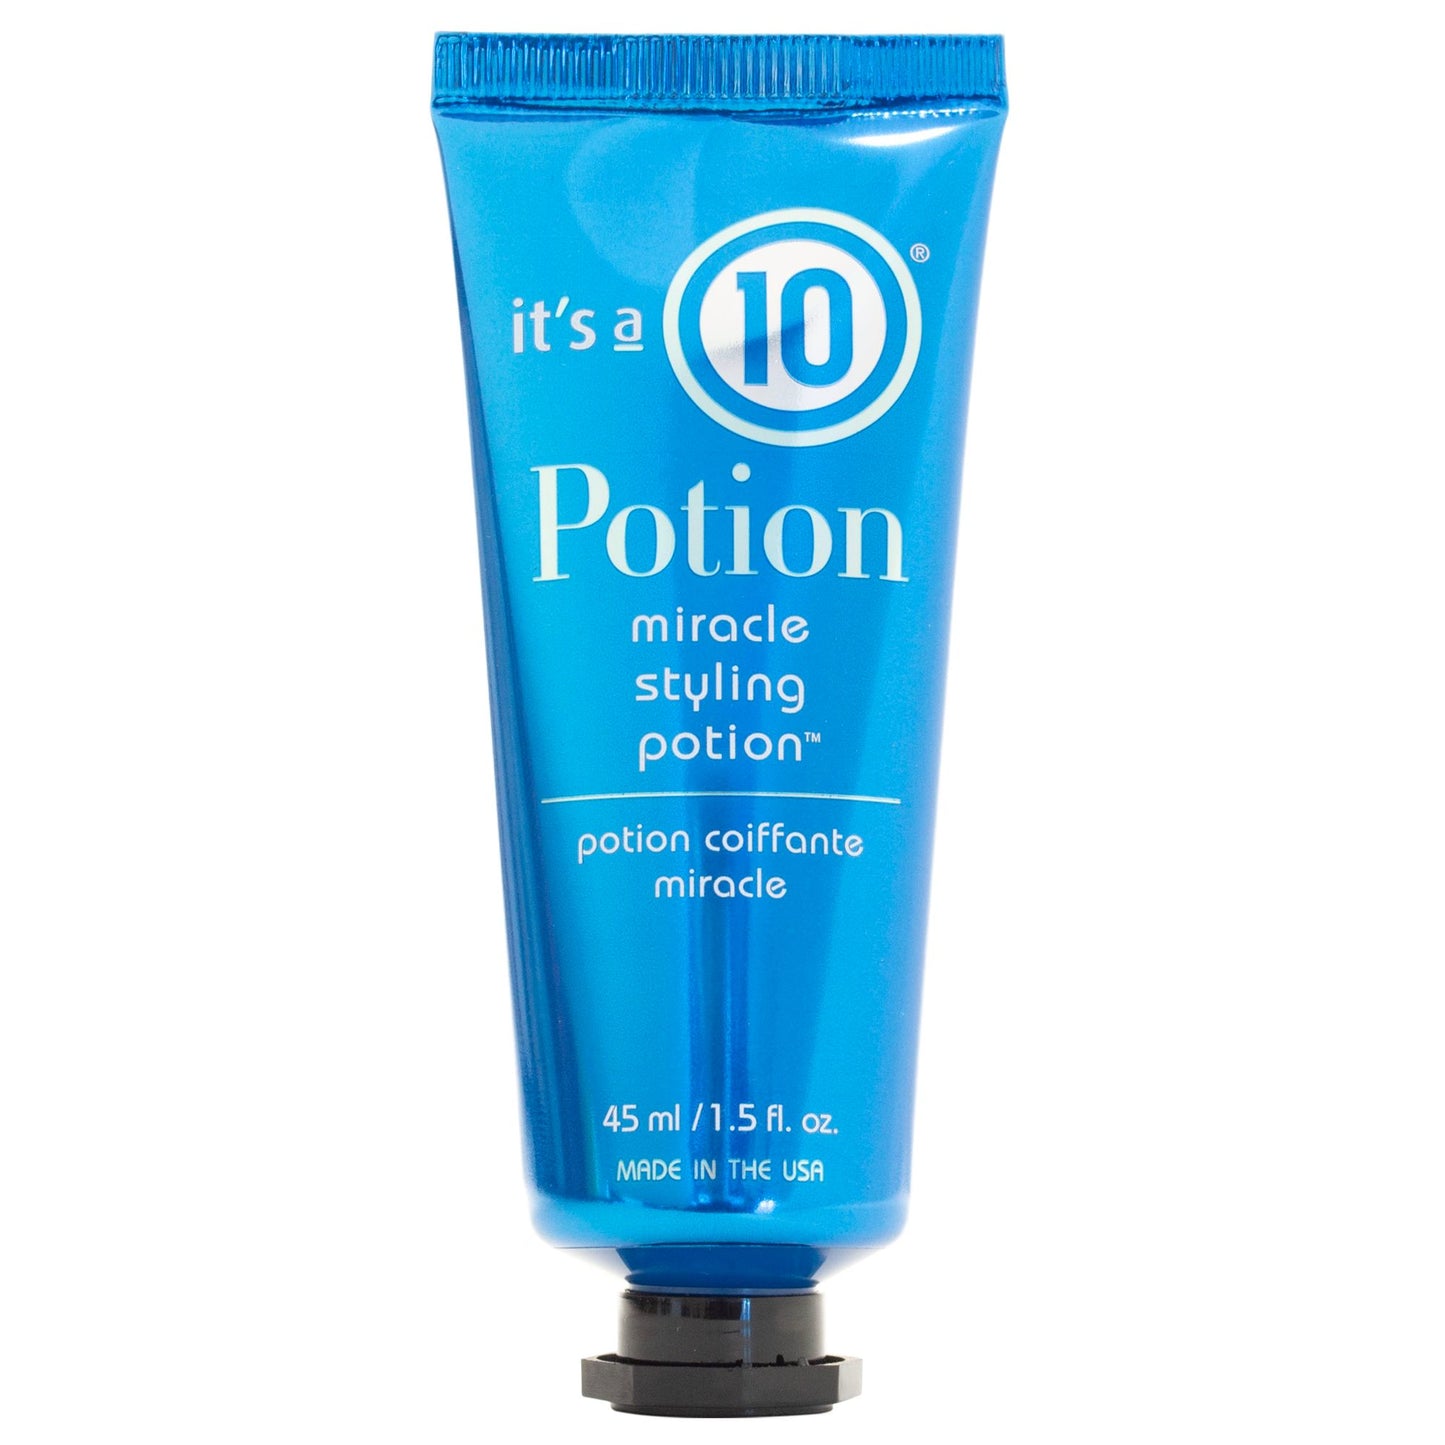 It's A 10 Potion 10 Miracle Styling Potion 1.5 oz